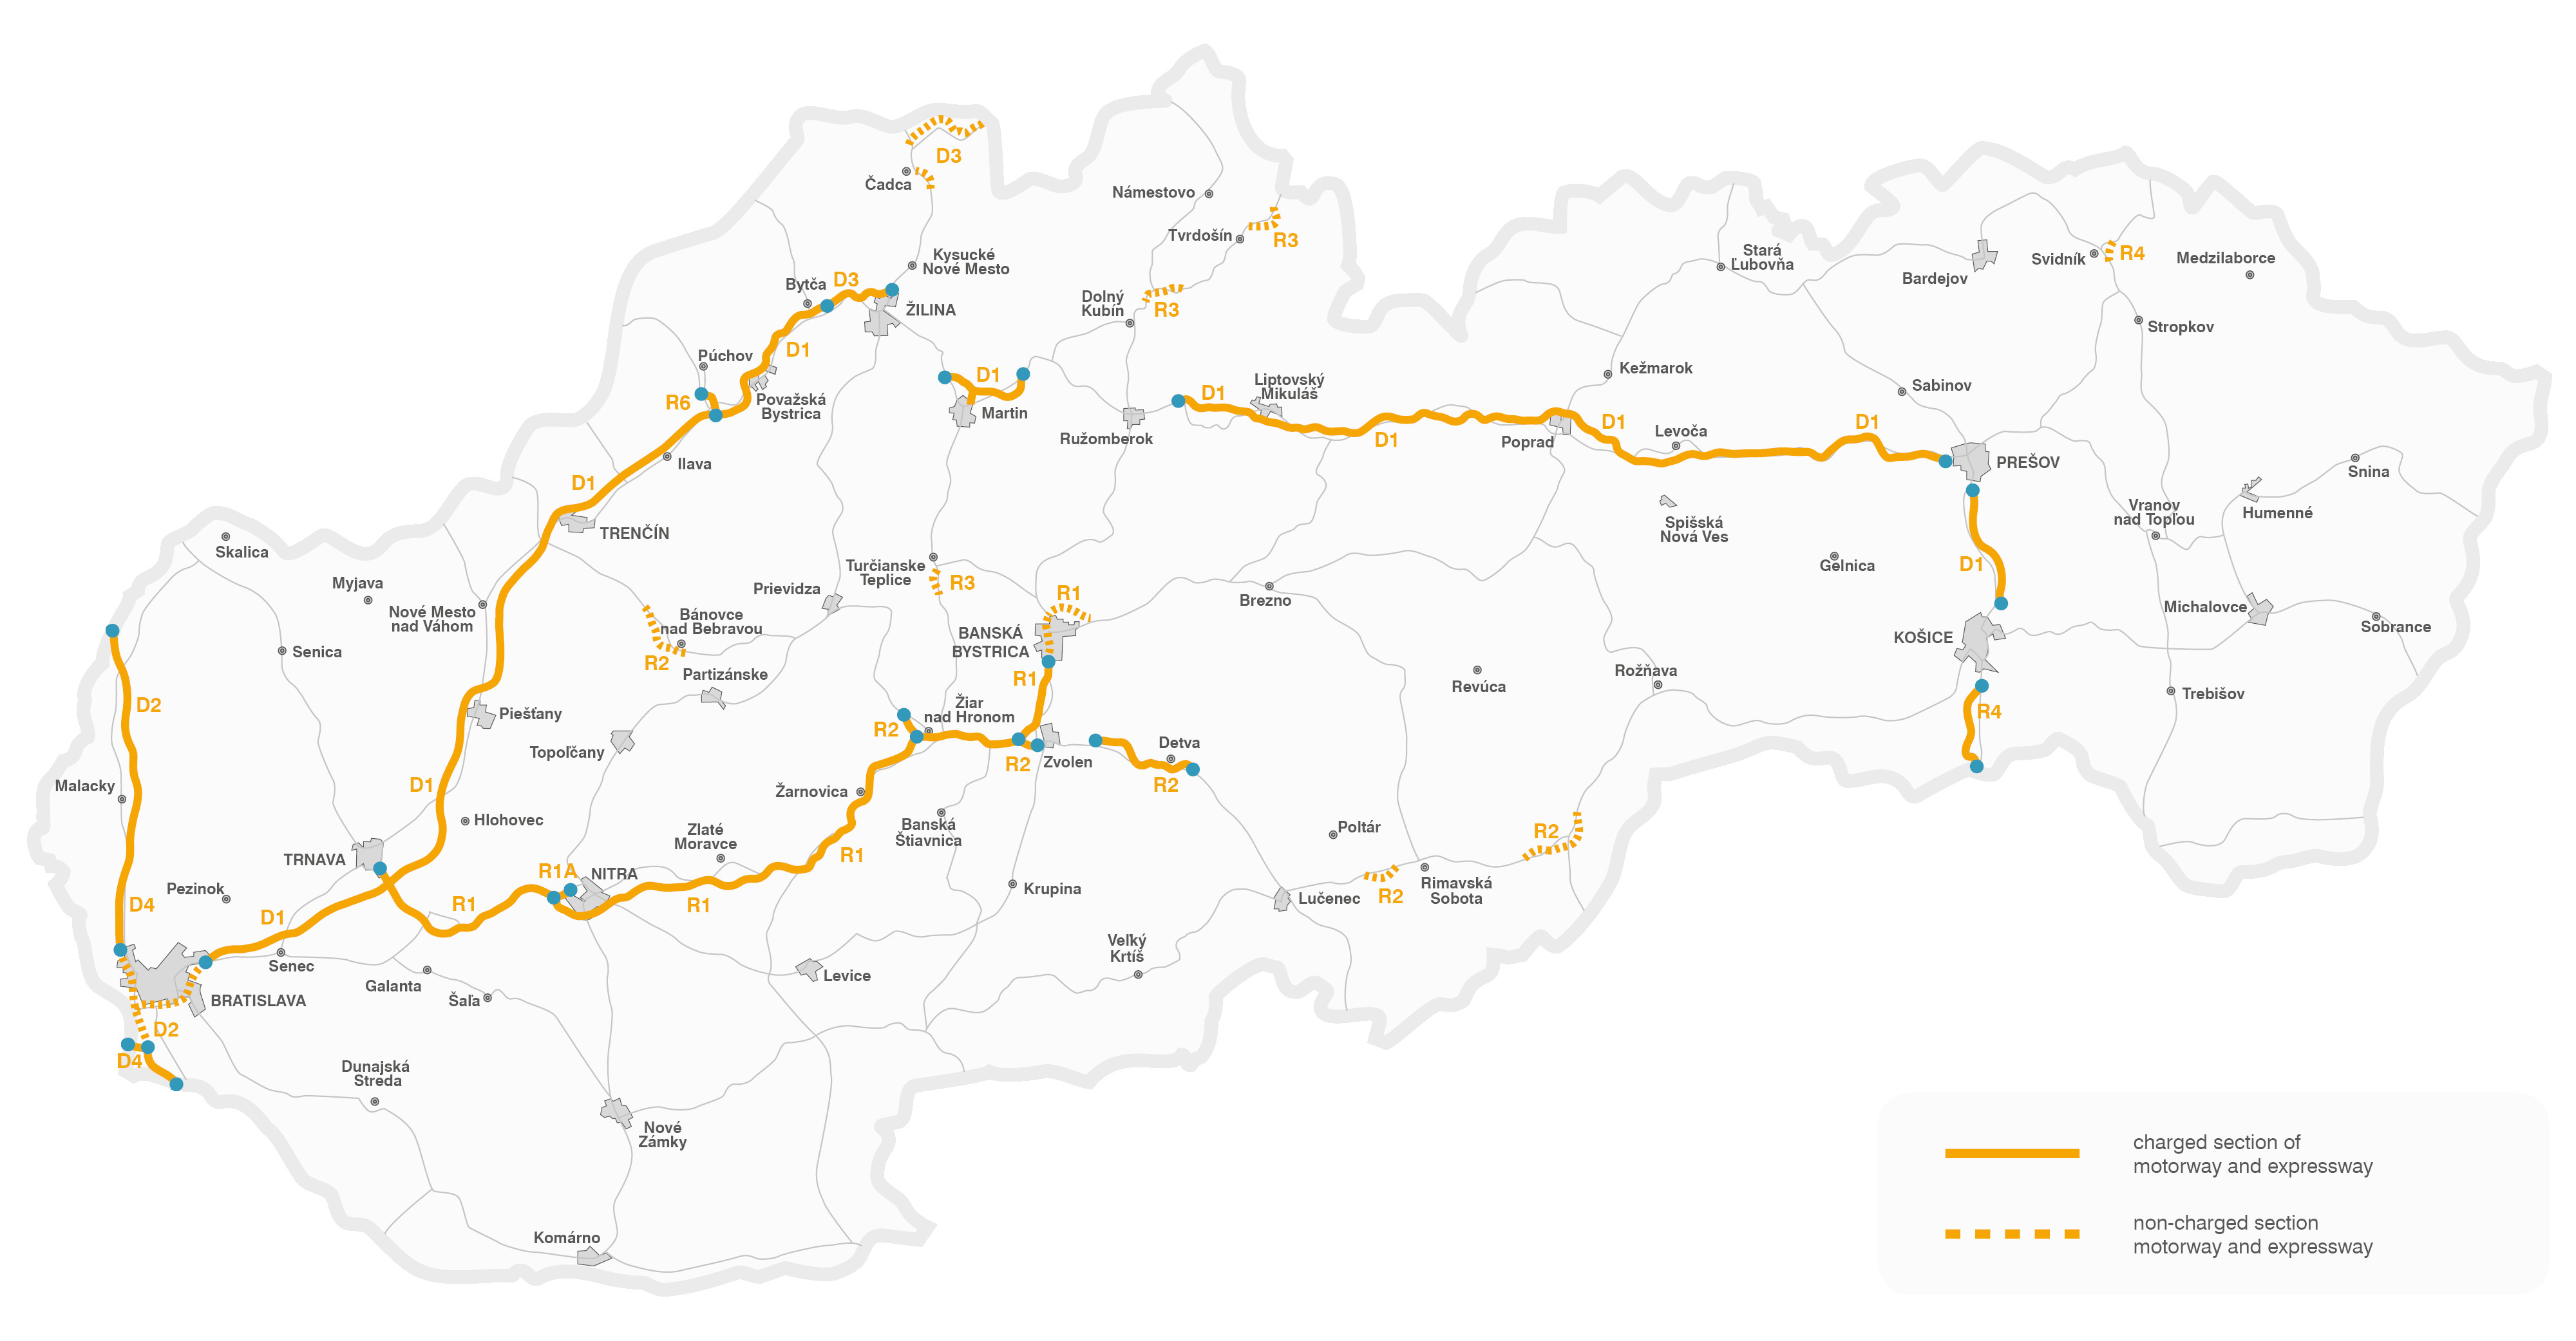 Map Of toll Roads In France Highway Vignettes Slovakia tolls Eu